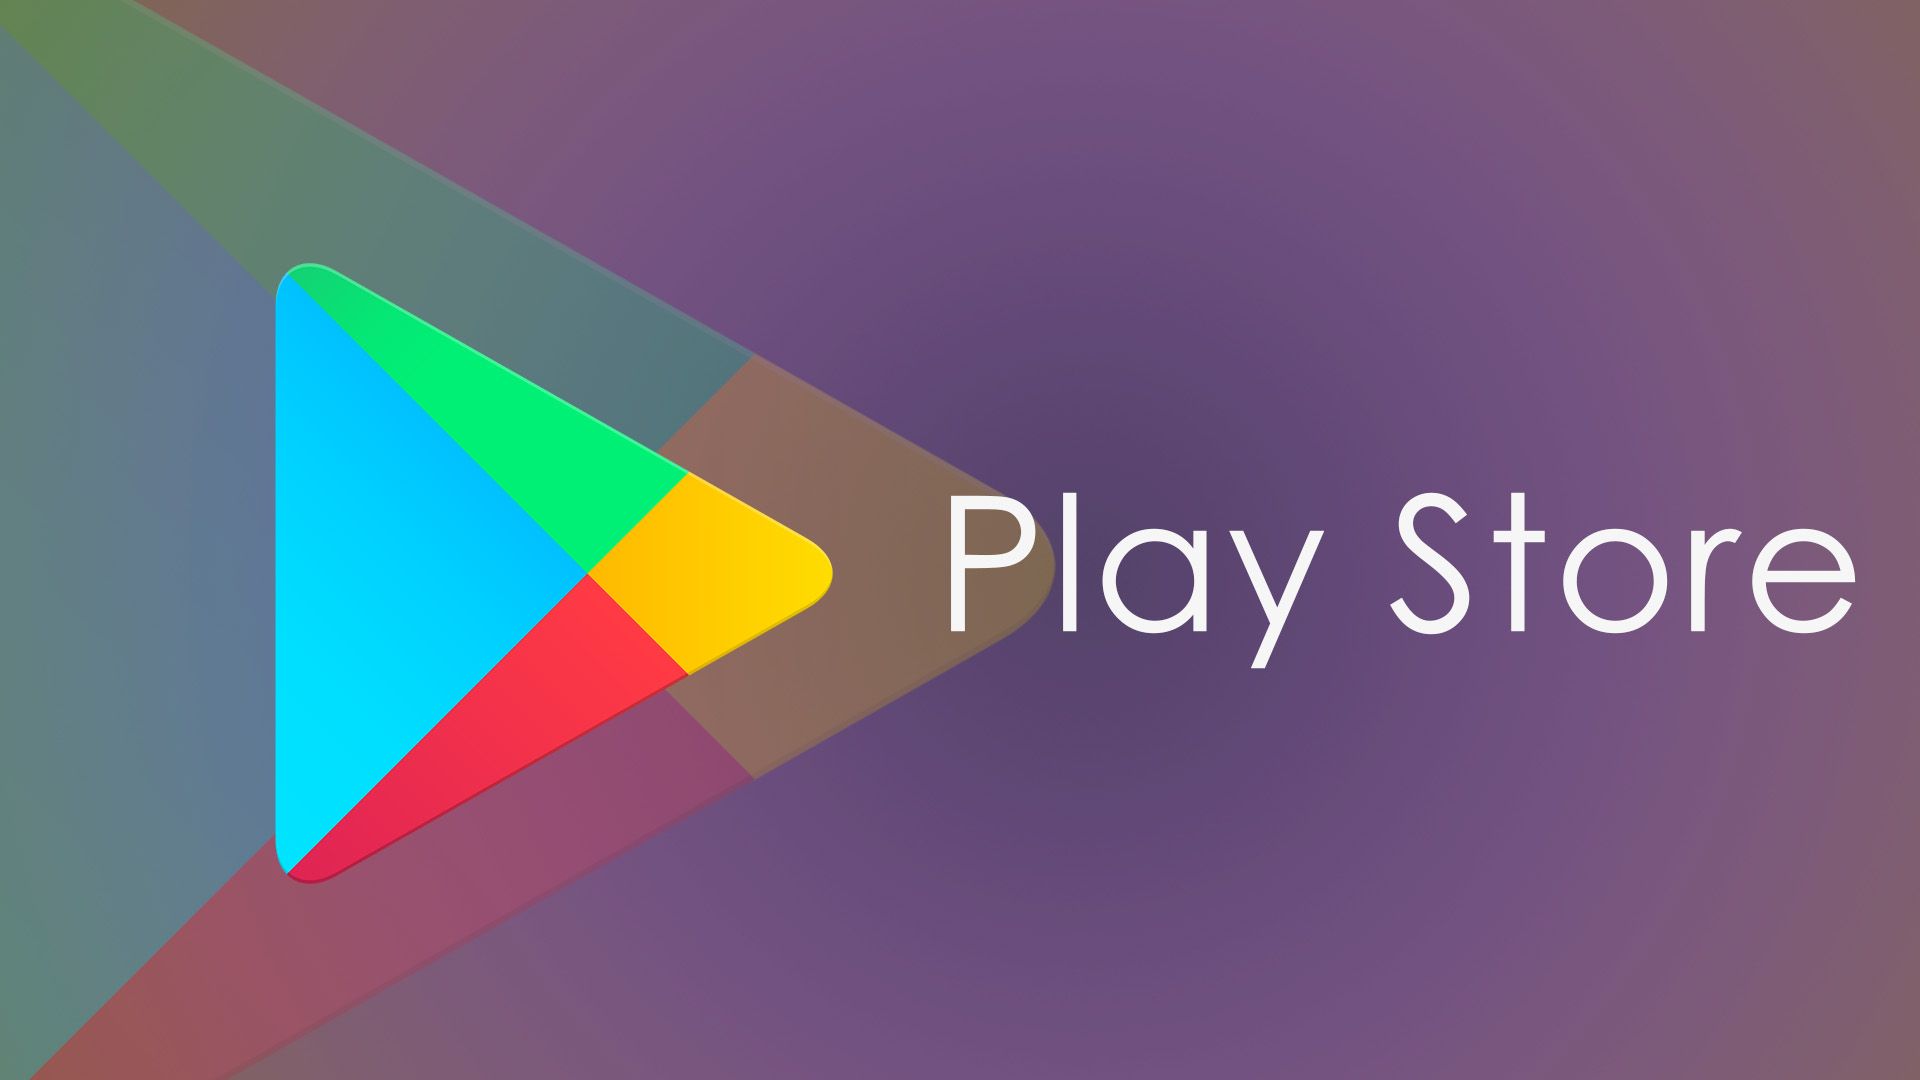 Play Store APK For Downloading | Unlimited Mobile APPs Store | APK Delight